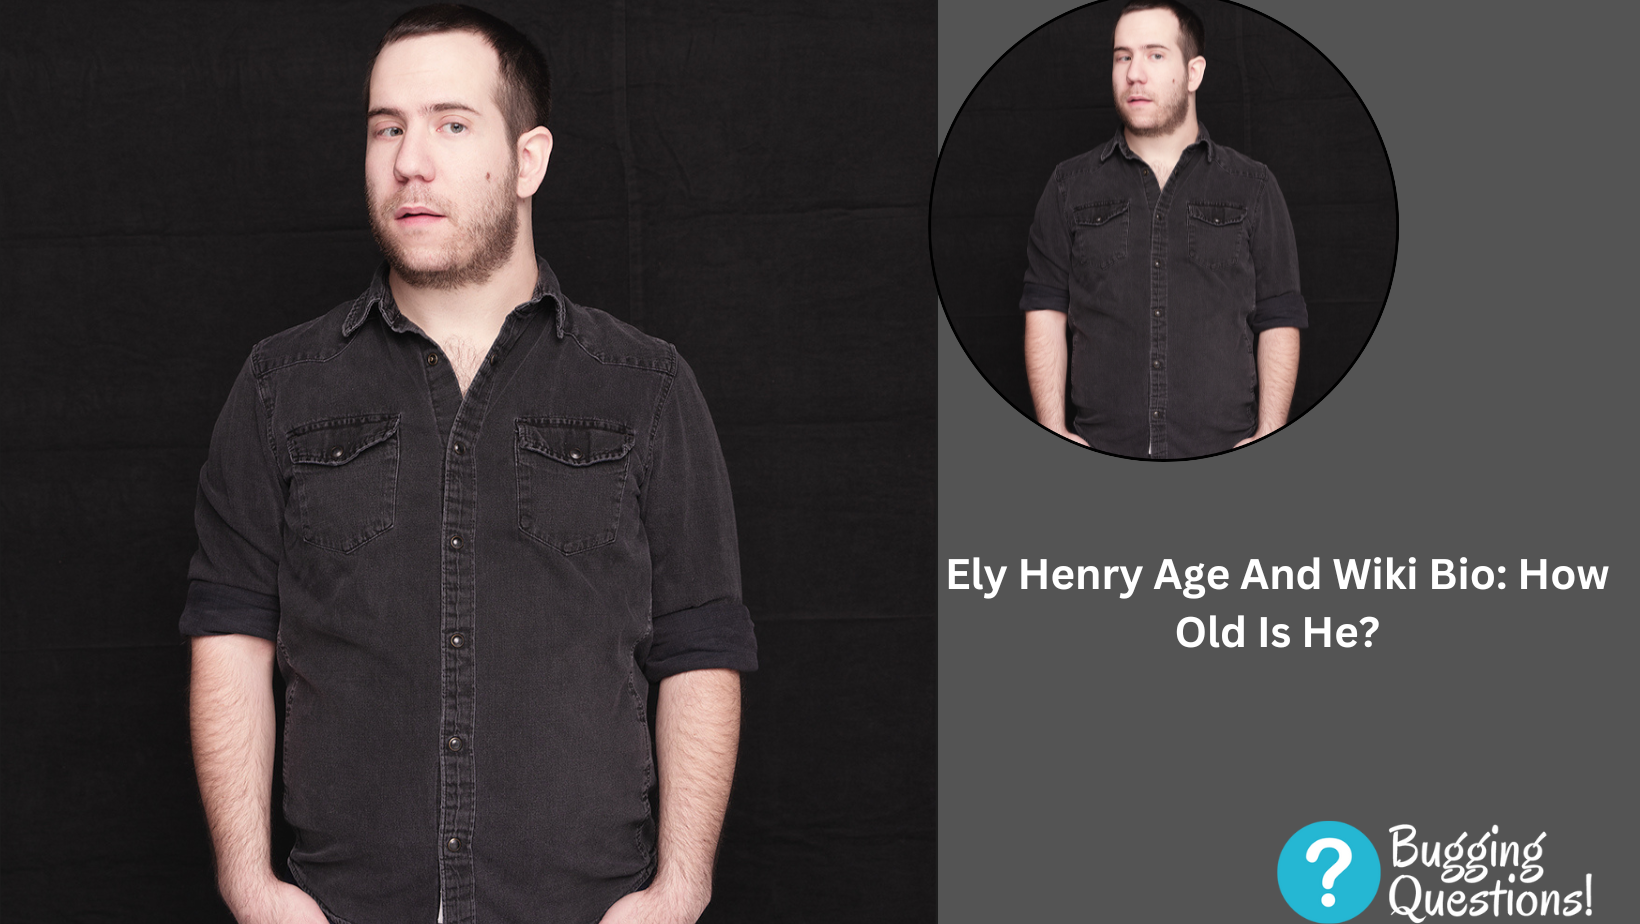 Ely Henry Age And Wiki Bio: How Old Is He?